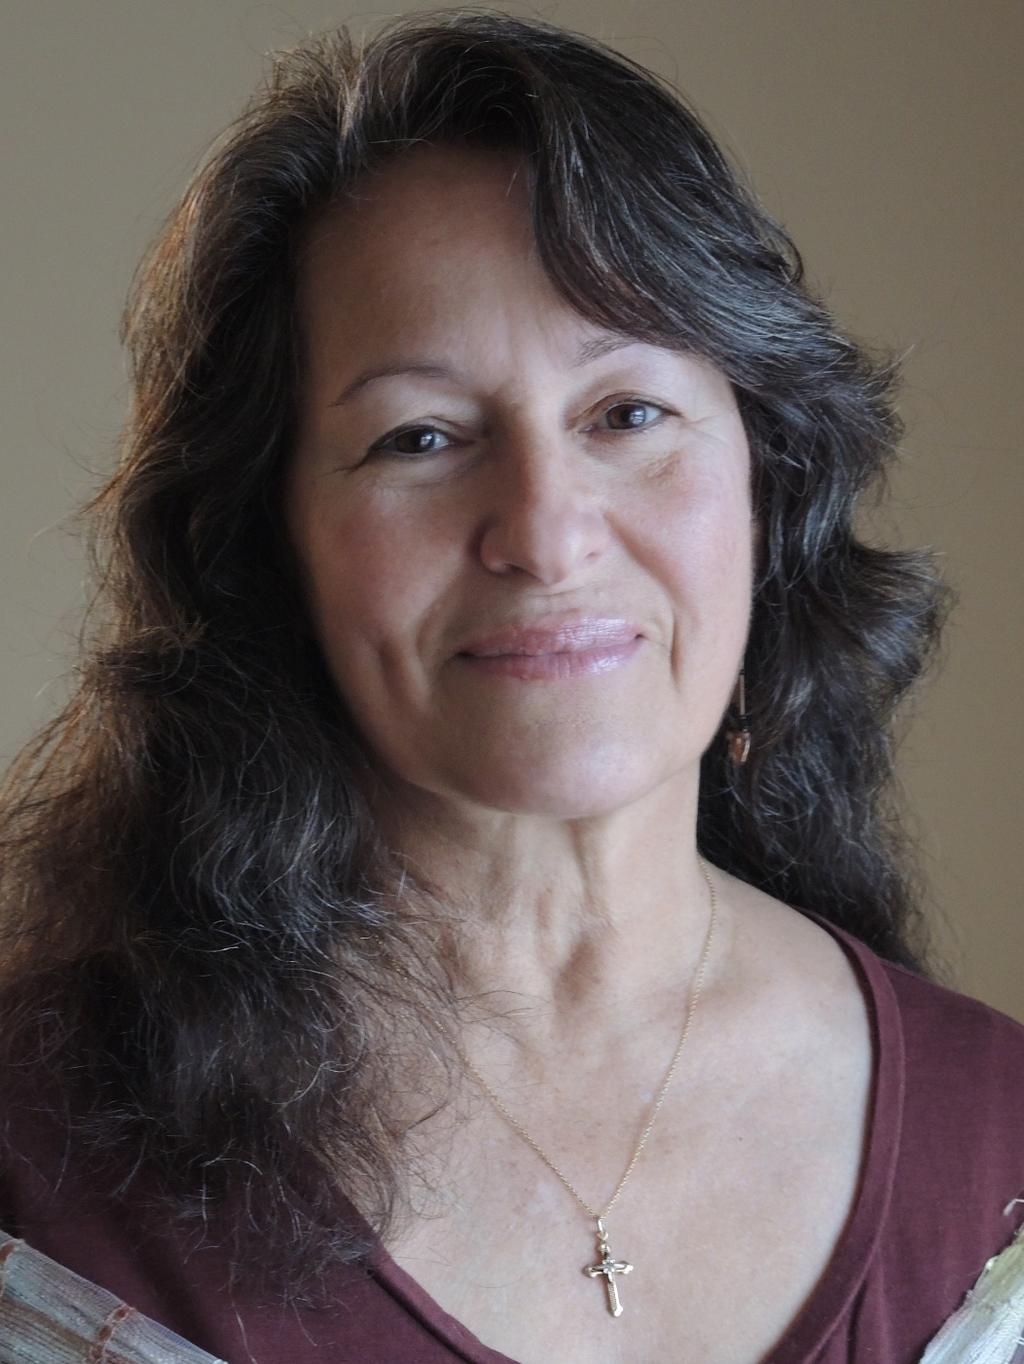 With degrees in visual communication and counseling combined with a background in meditation and education, Tammy s compassionate approach to her work helps people of all ages connect with their